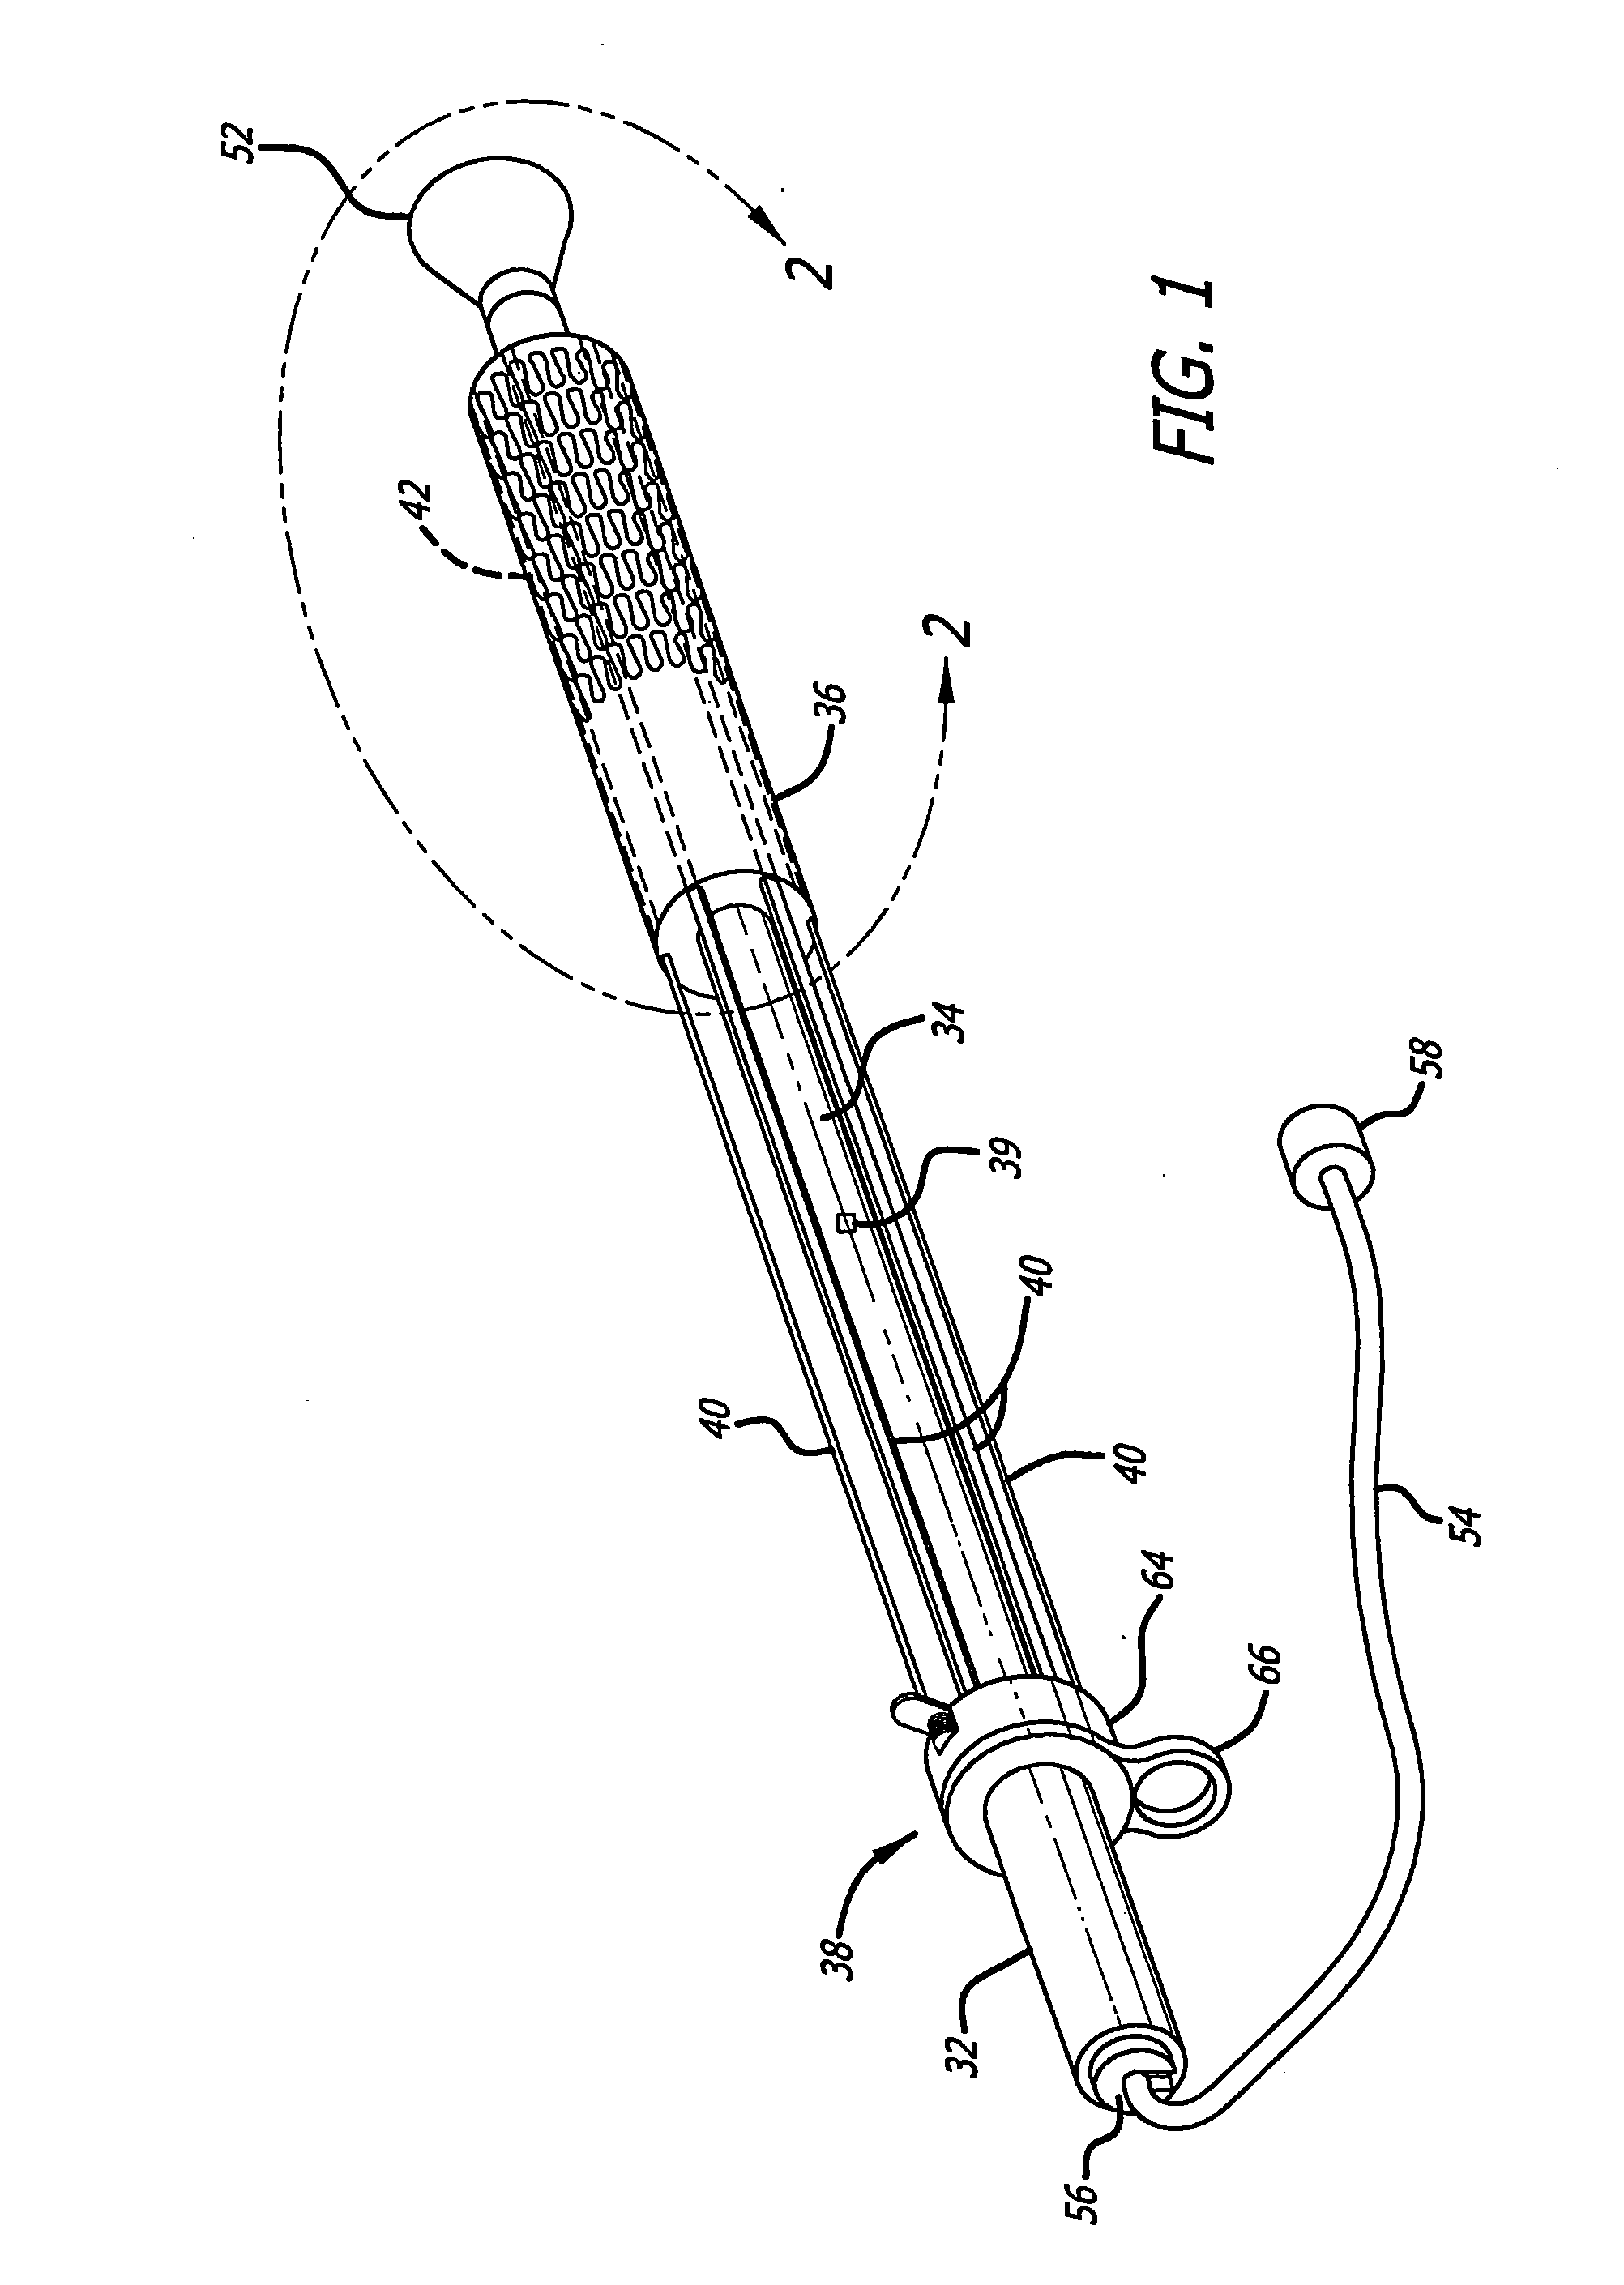 Cardiac harness delivery device